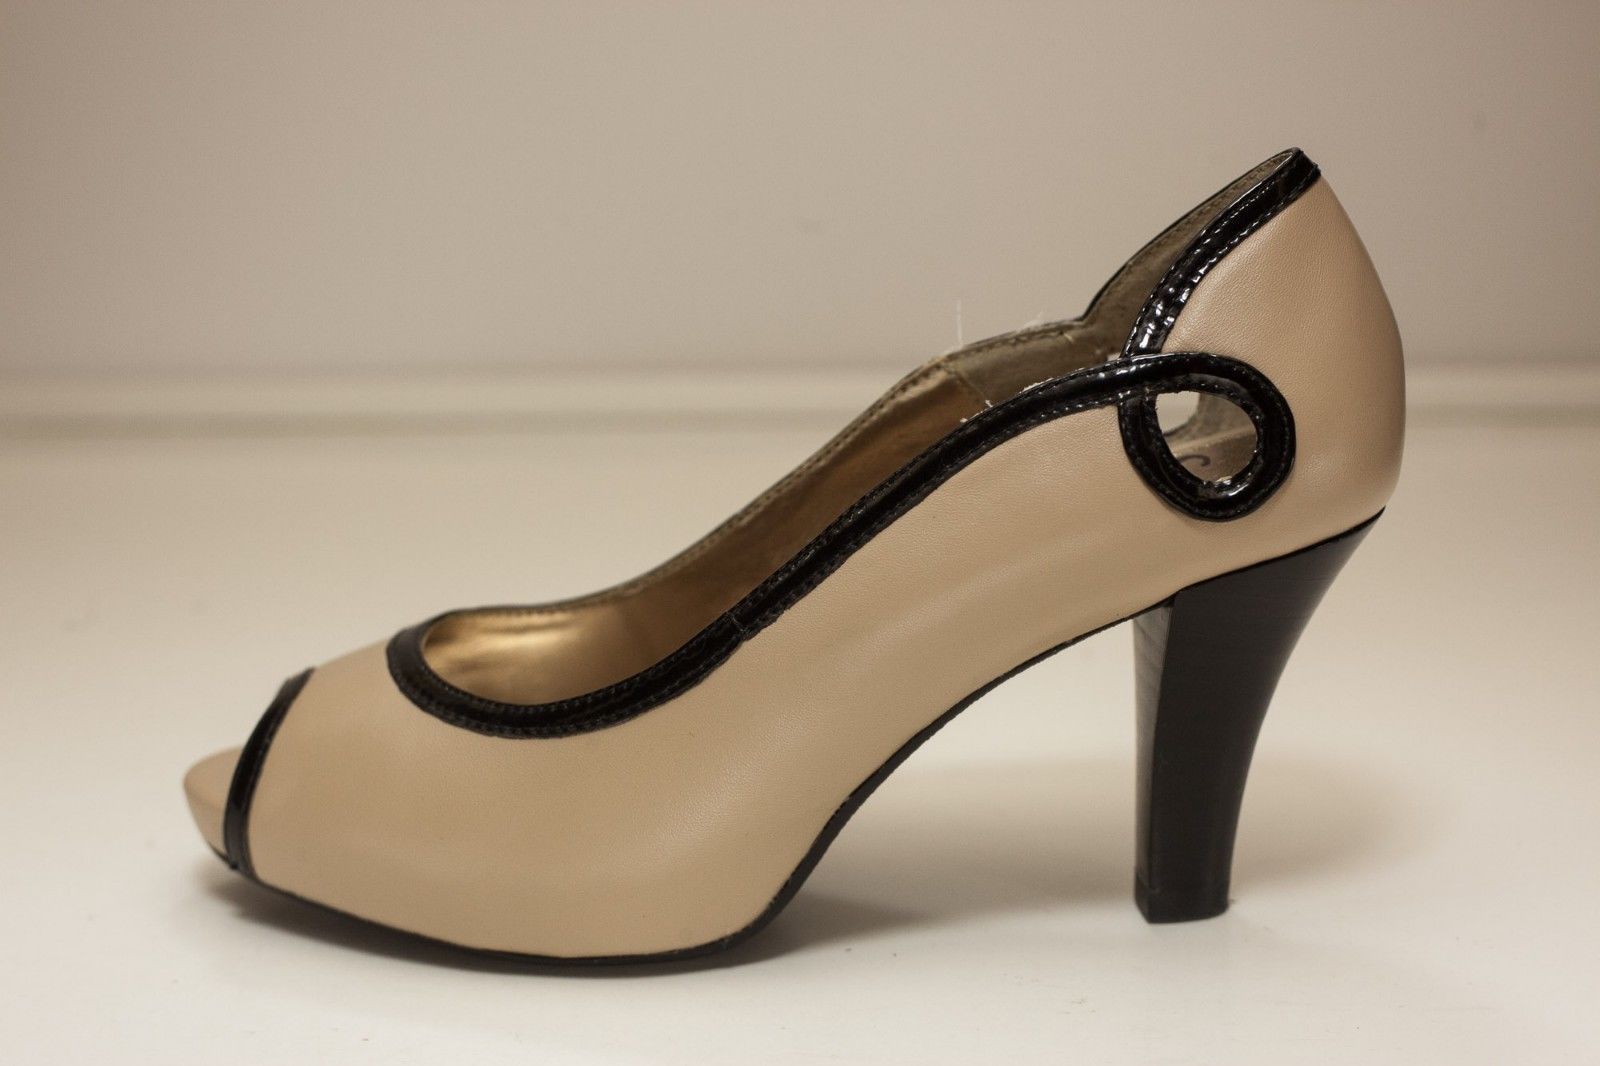 Sofft 6M Nude Peep Toe Pumps and 16 